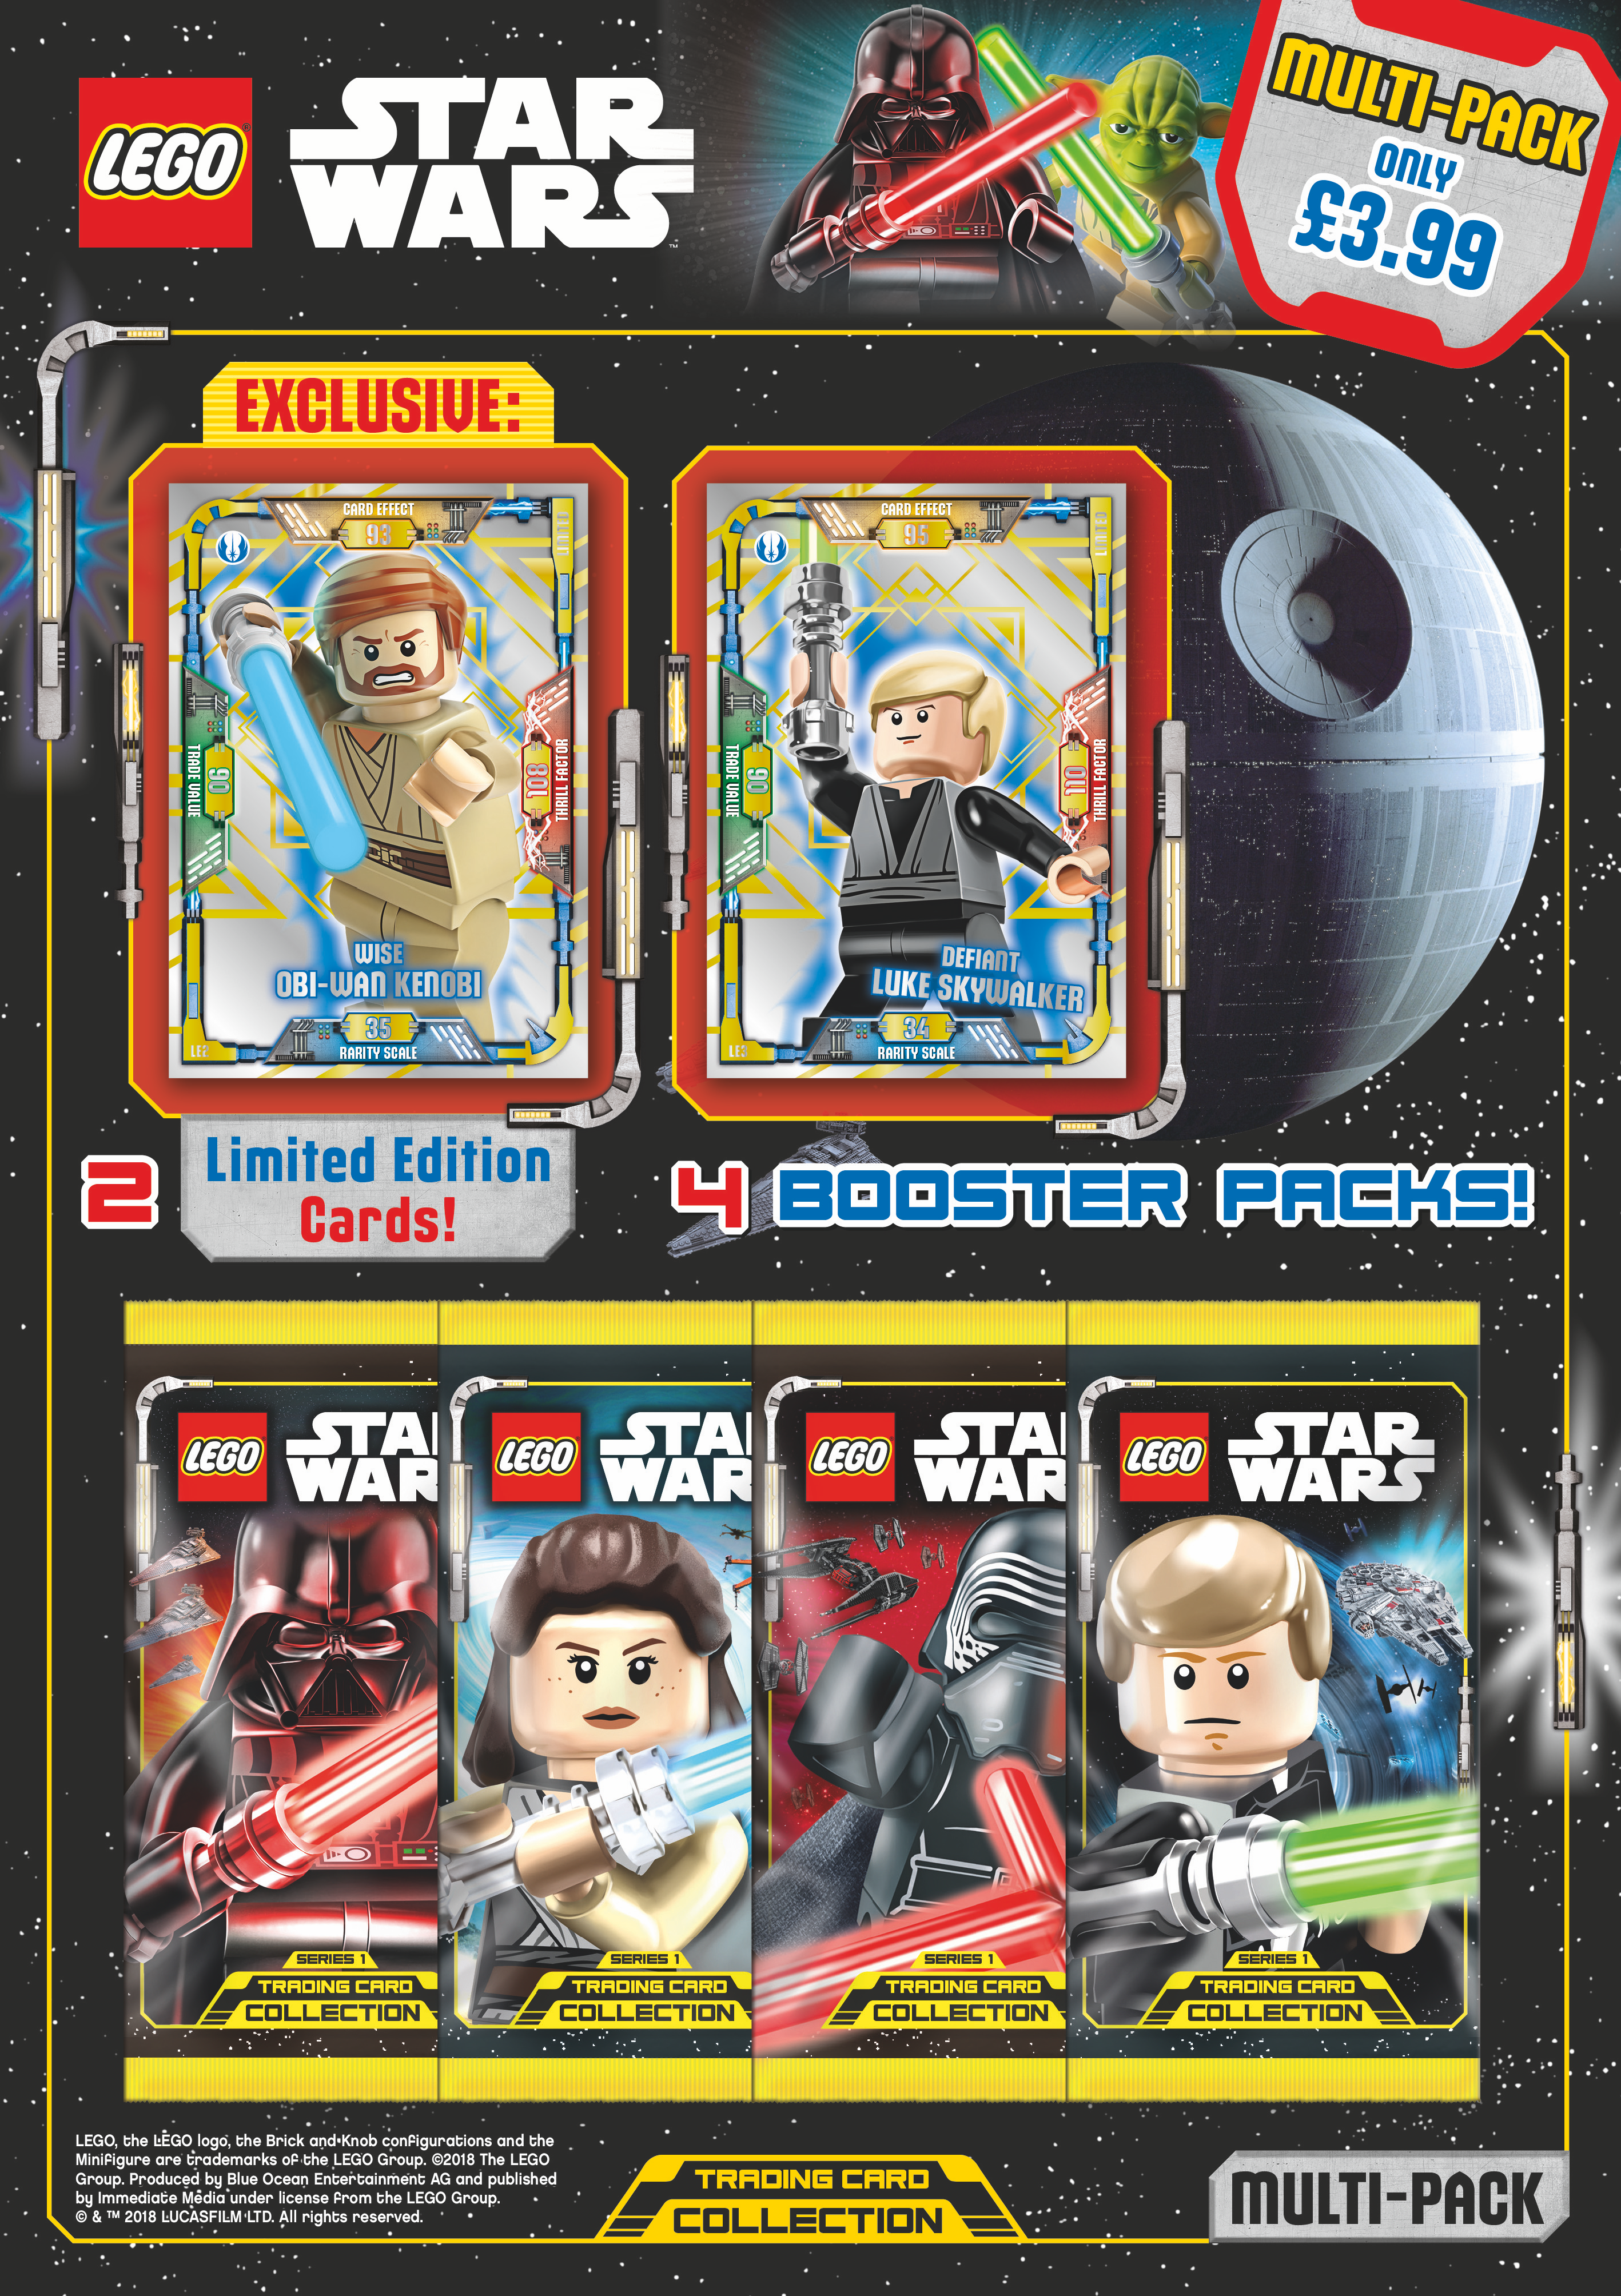 IMMEDIATE LAUNCHES NEW COLLECTABLE LEGO®